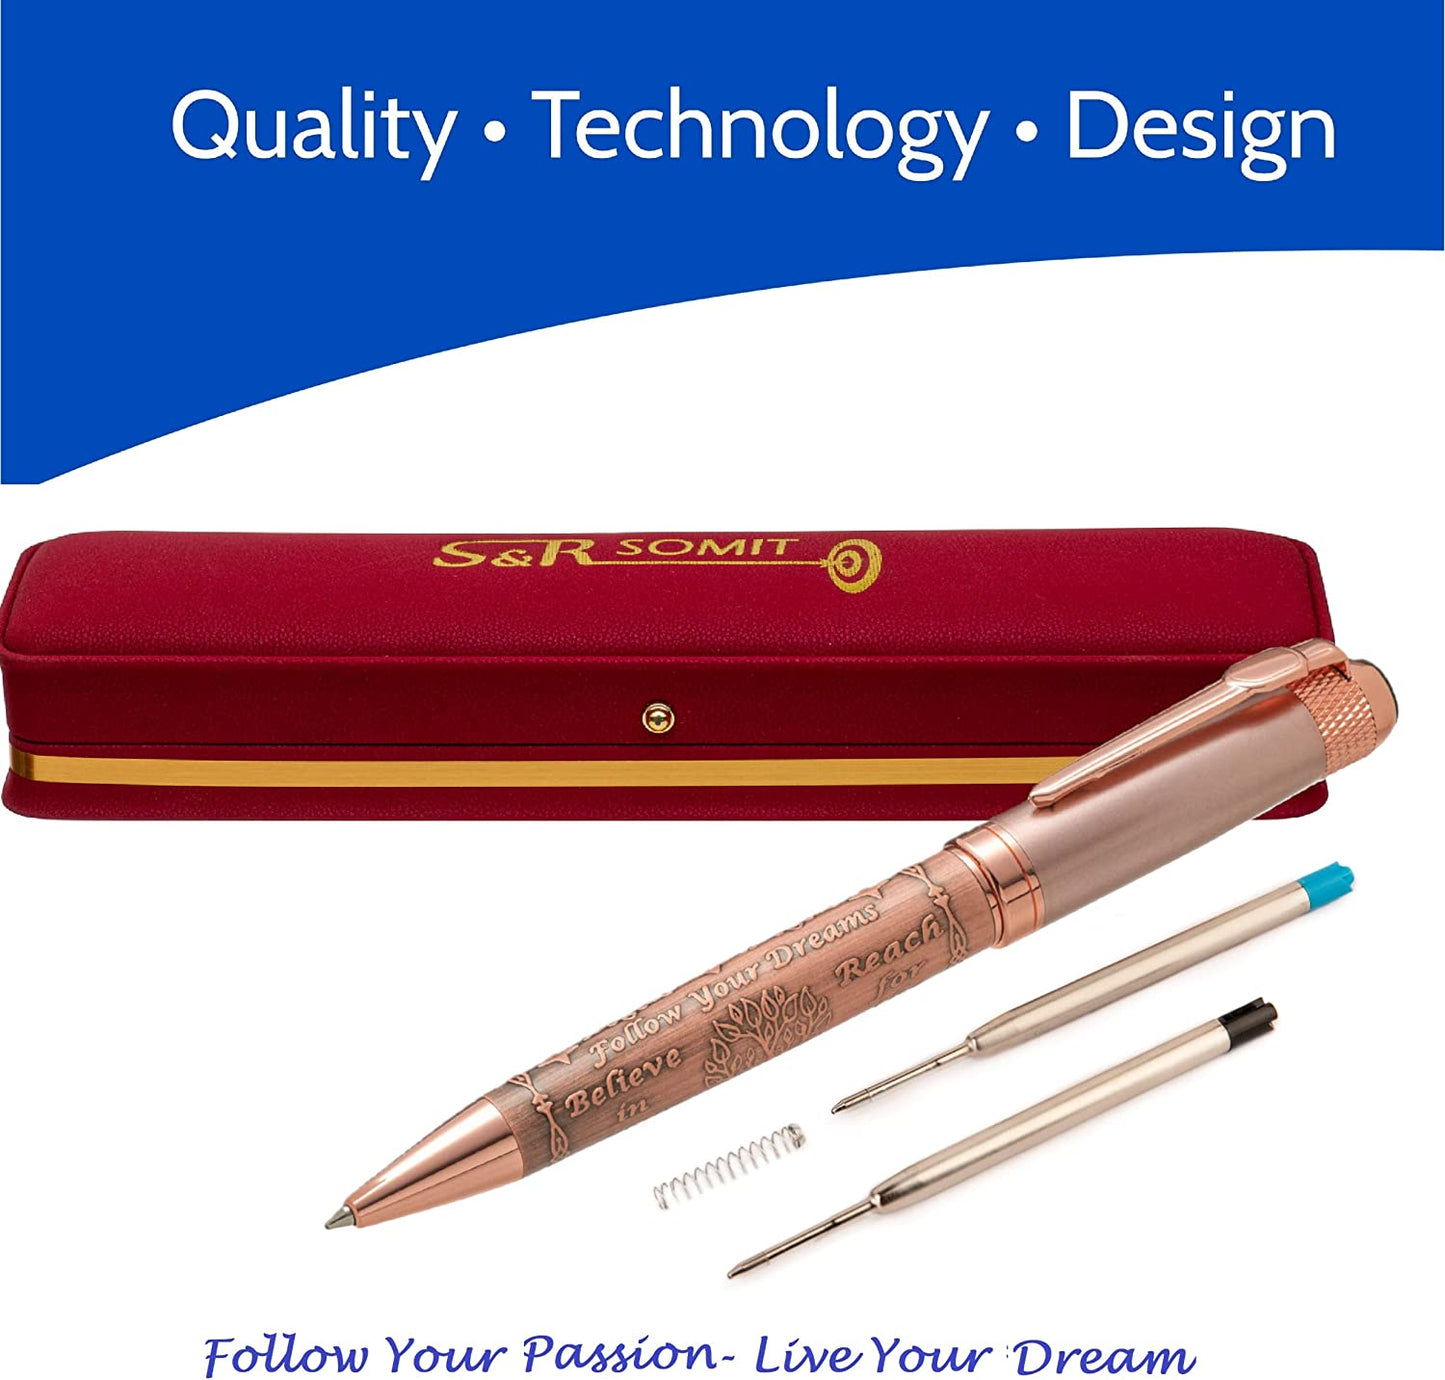 Luxury Ball Point Pen with LED Gift Box - The Perfect Elegance Gift (Golden Rose)